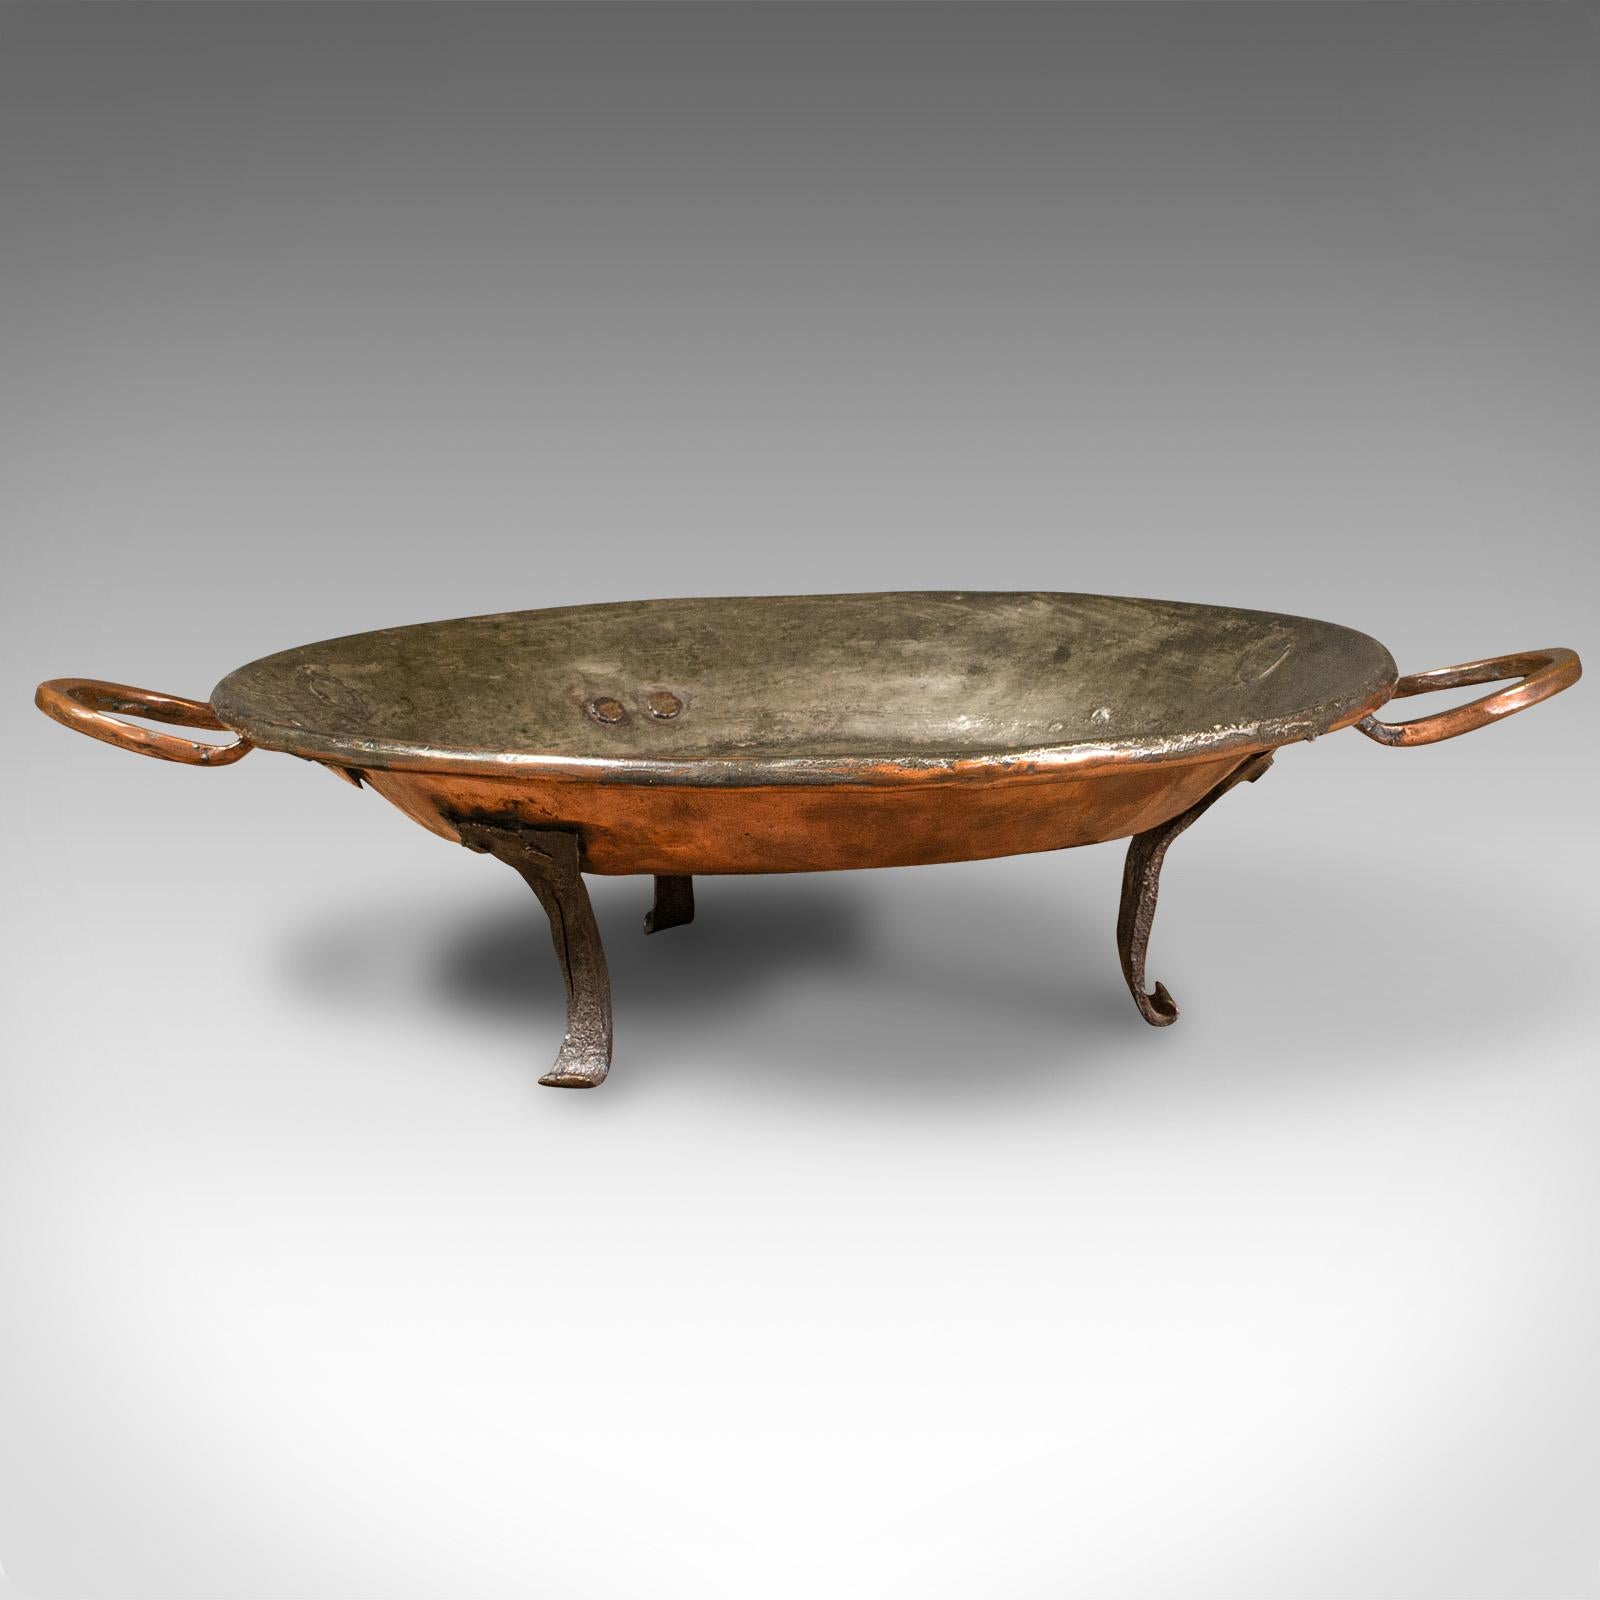 This is an antique cooking dish. An English, copper decorative tray, dating to the Georgian period, circa 1750.

Wonderfully hand-beaten and forged antique dish
Displays a desirable aged patina throughout
Copper and tinned copper hues contrast